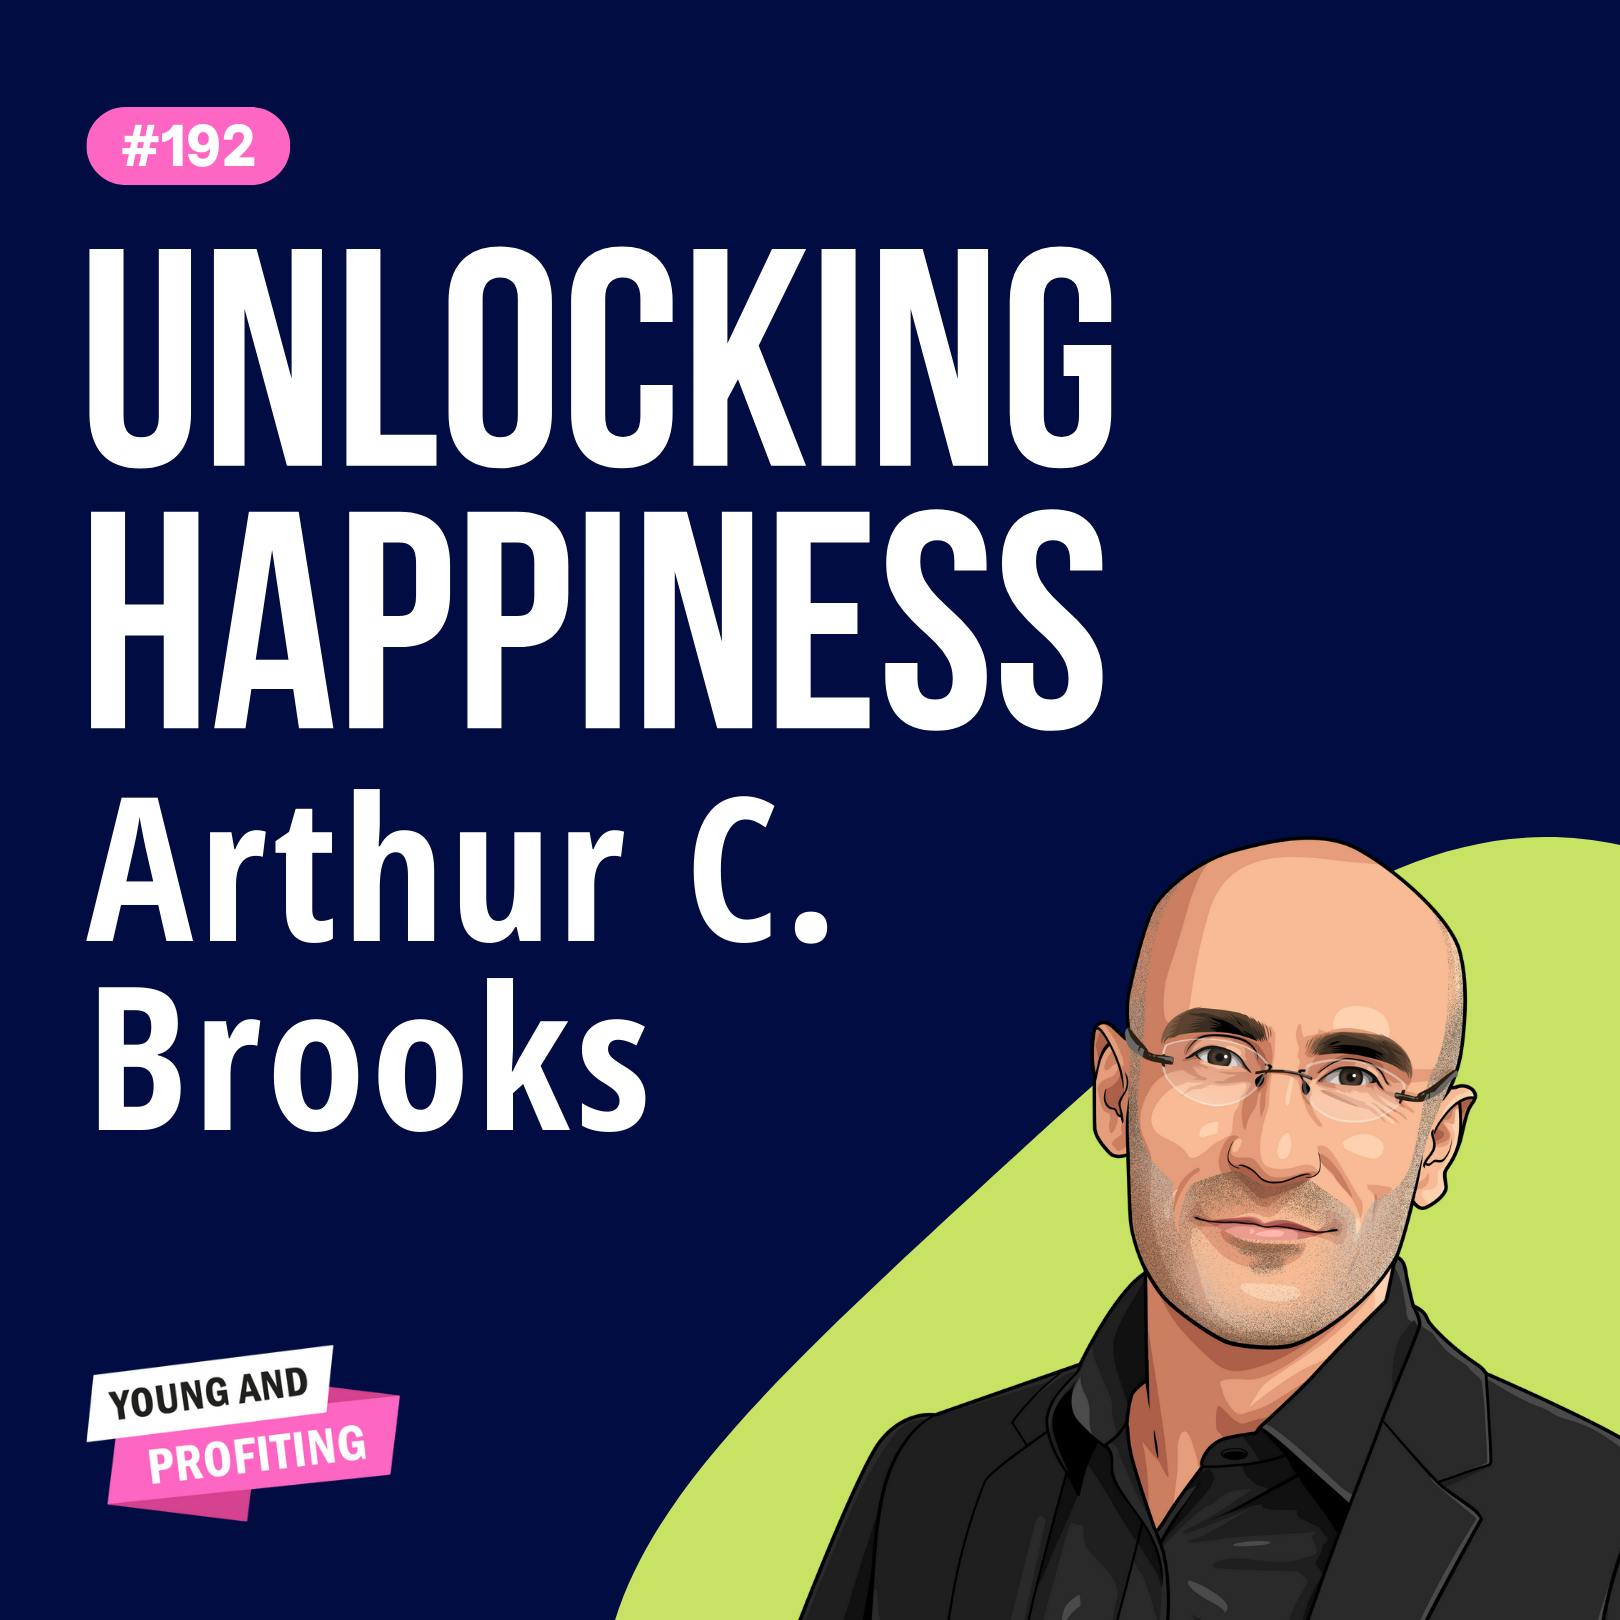 Arthur C. Brooks: Cracking the Code to Happiness, The Biology of Intelligence, and Creating a Fulfilling Life | E192